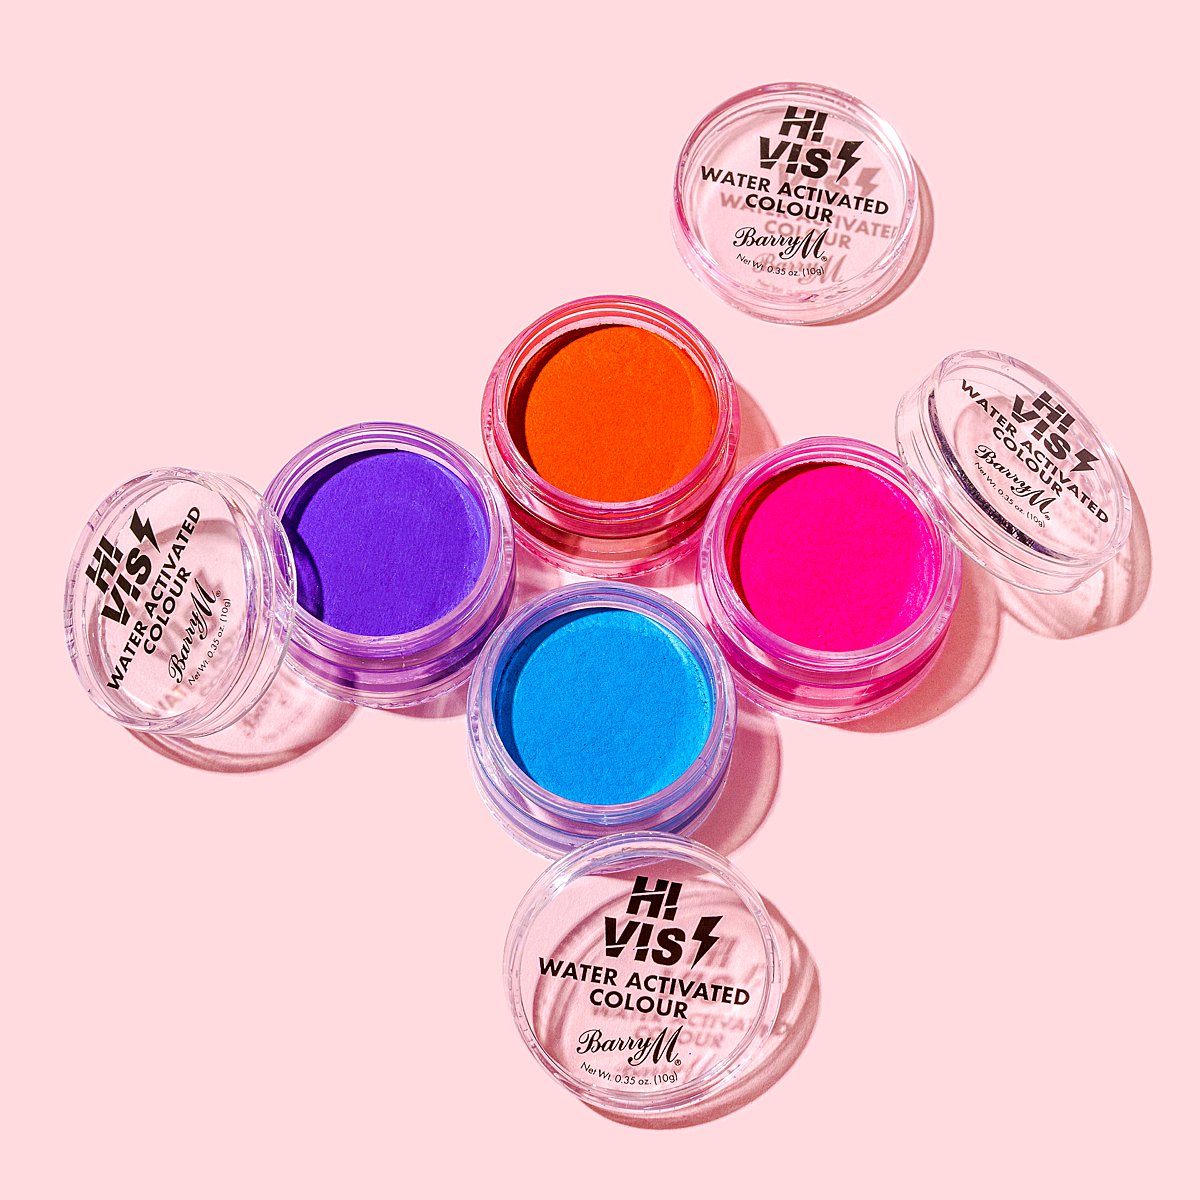 Colourful content creation for Barry M cosmetics. Styled makeup product stills photography by Marianne Taylor.